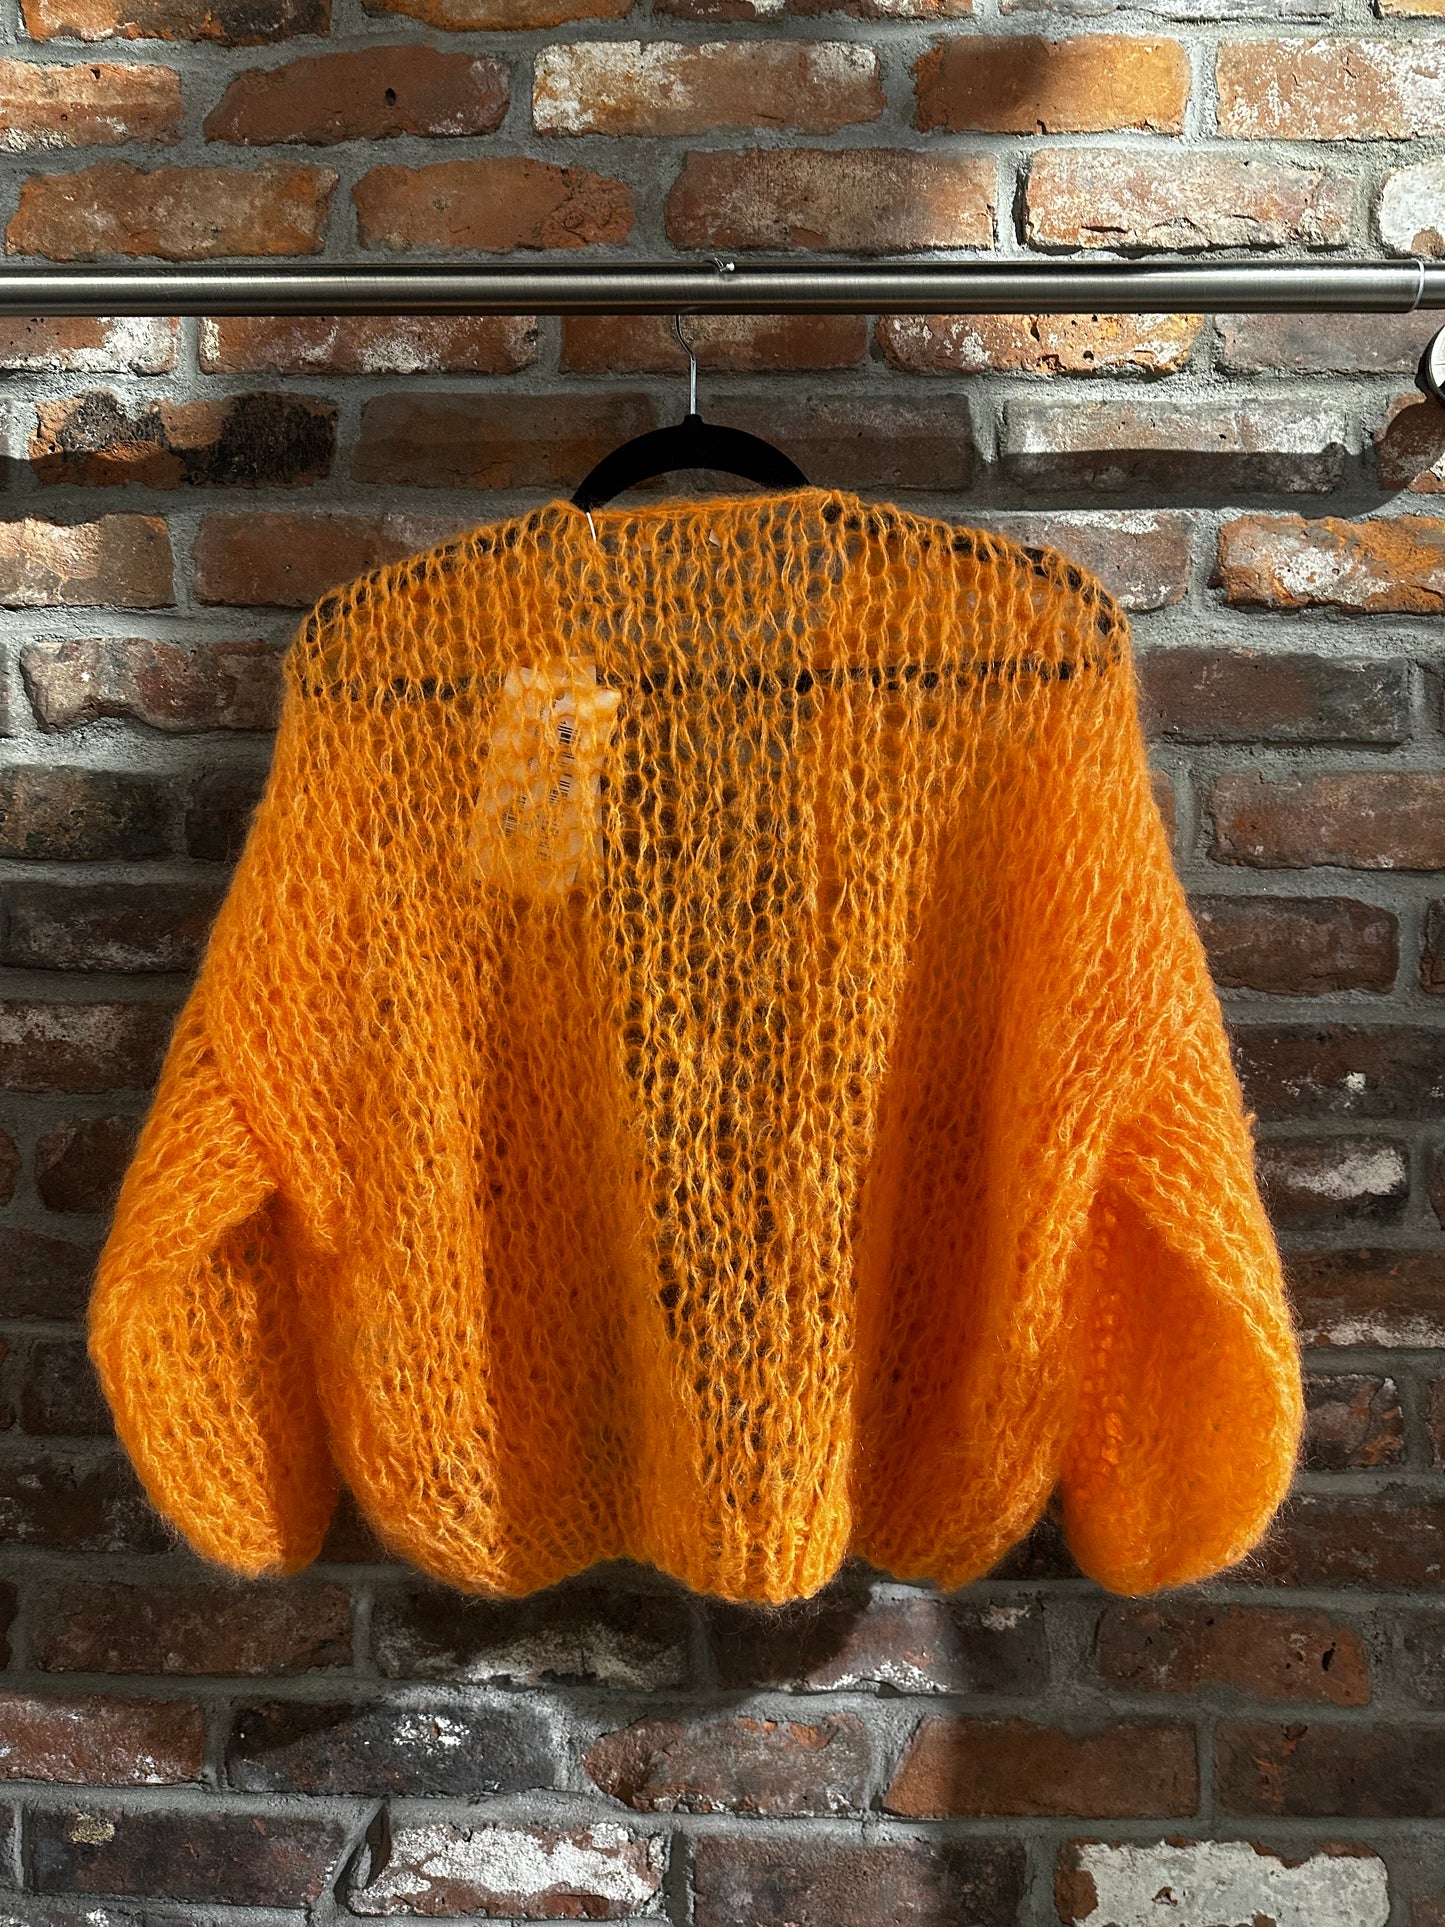 Mohair Bomber Cardigan Light in Cantaloupe by Maiami - Haven